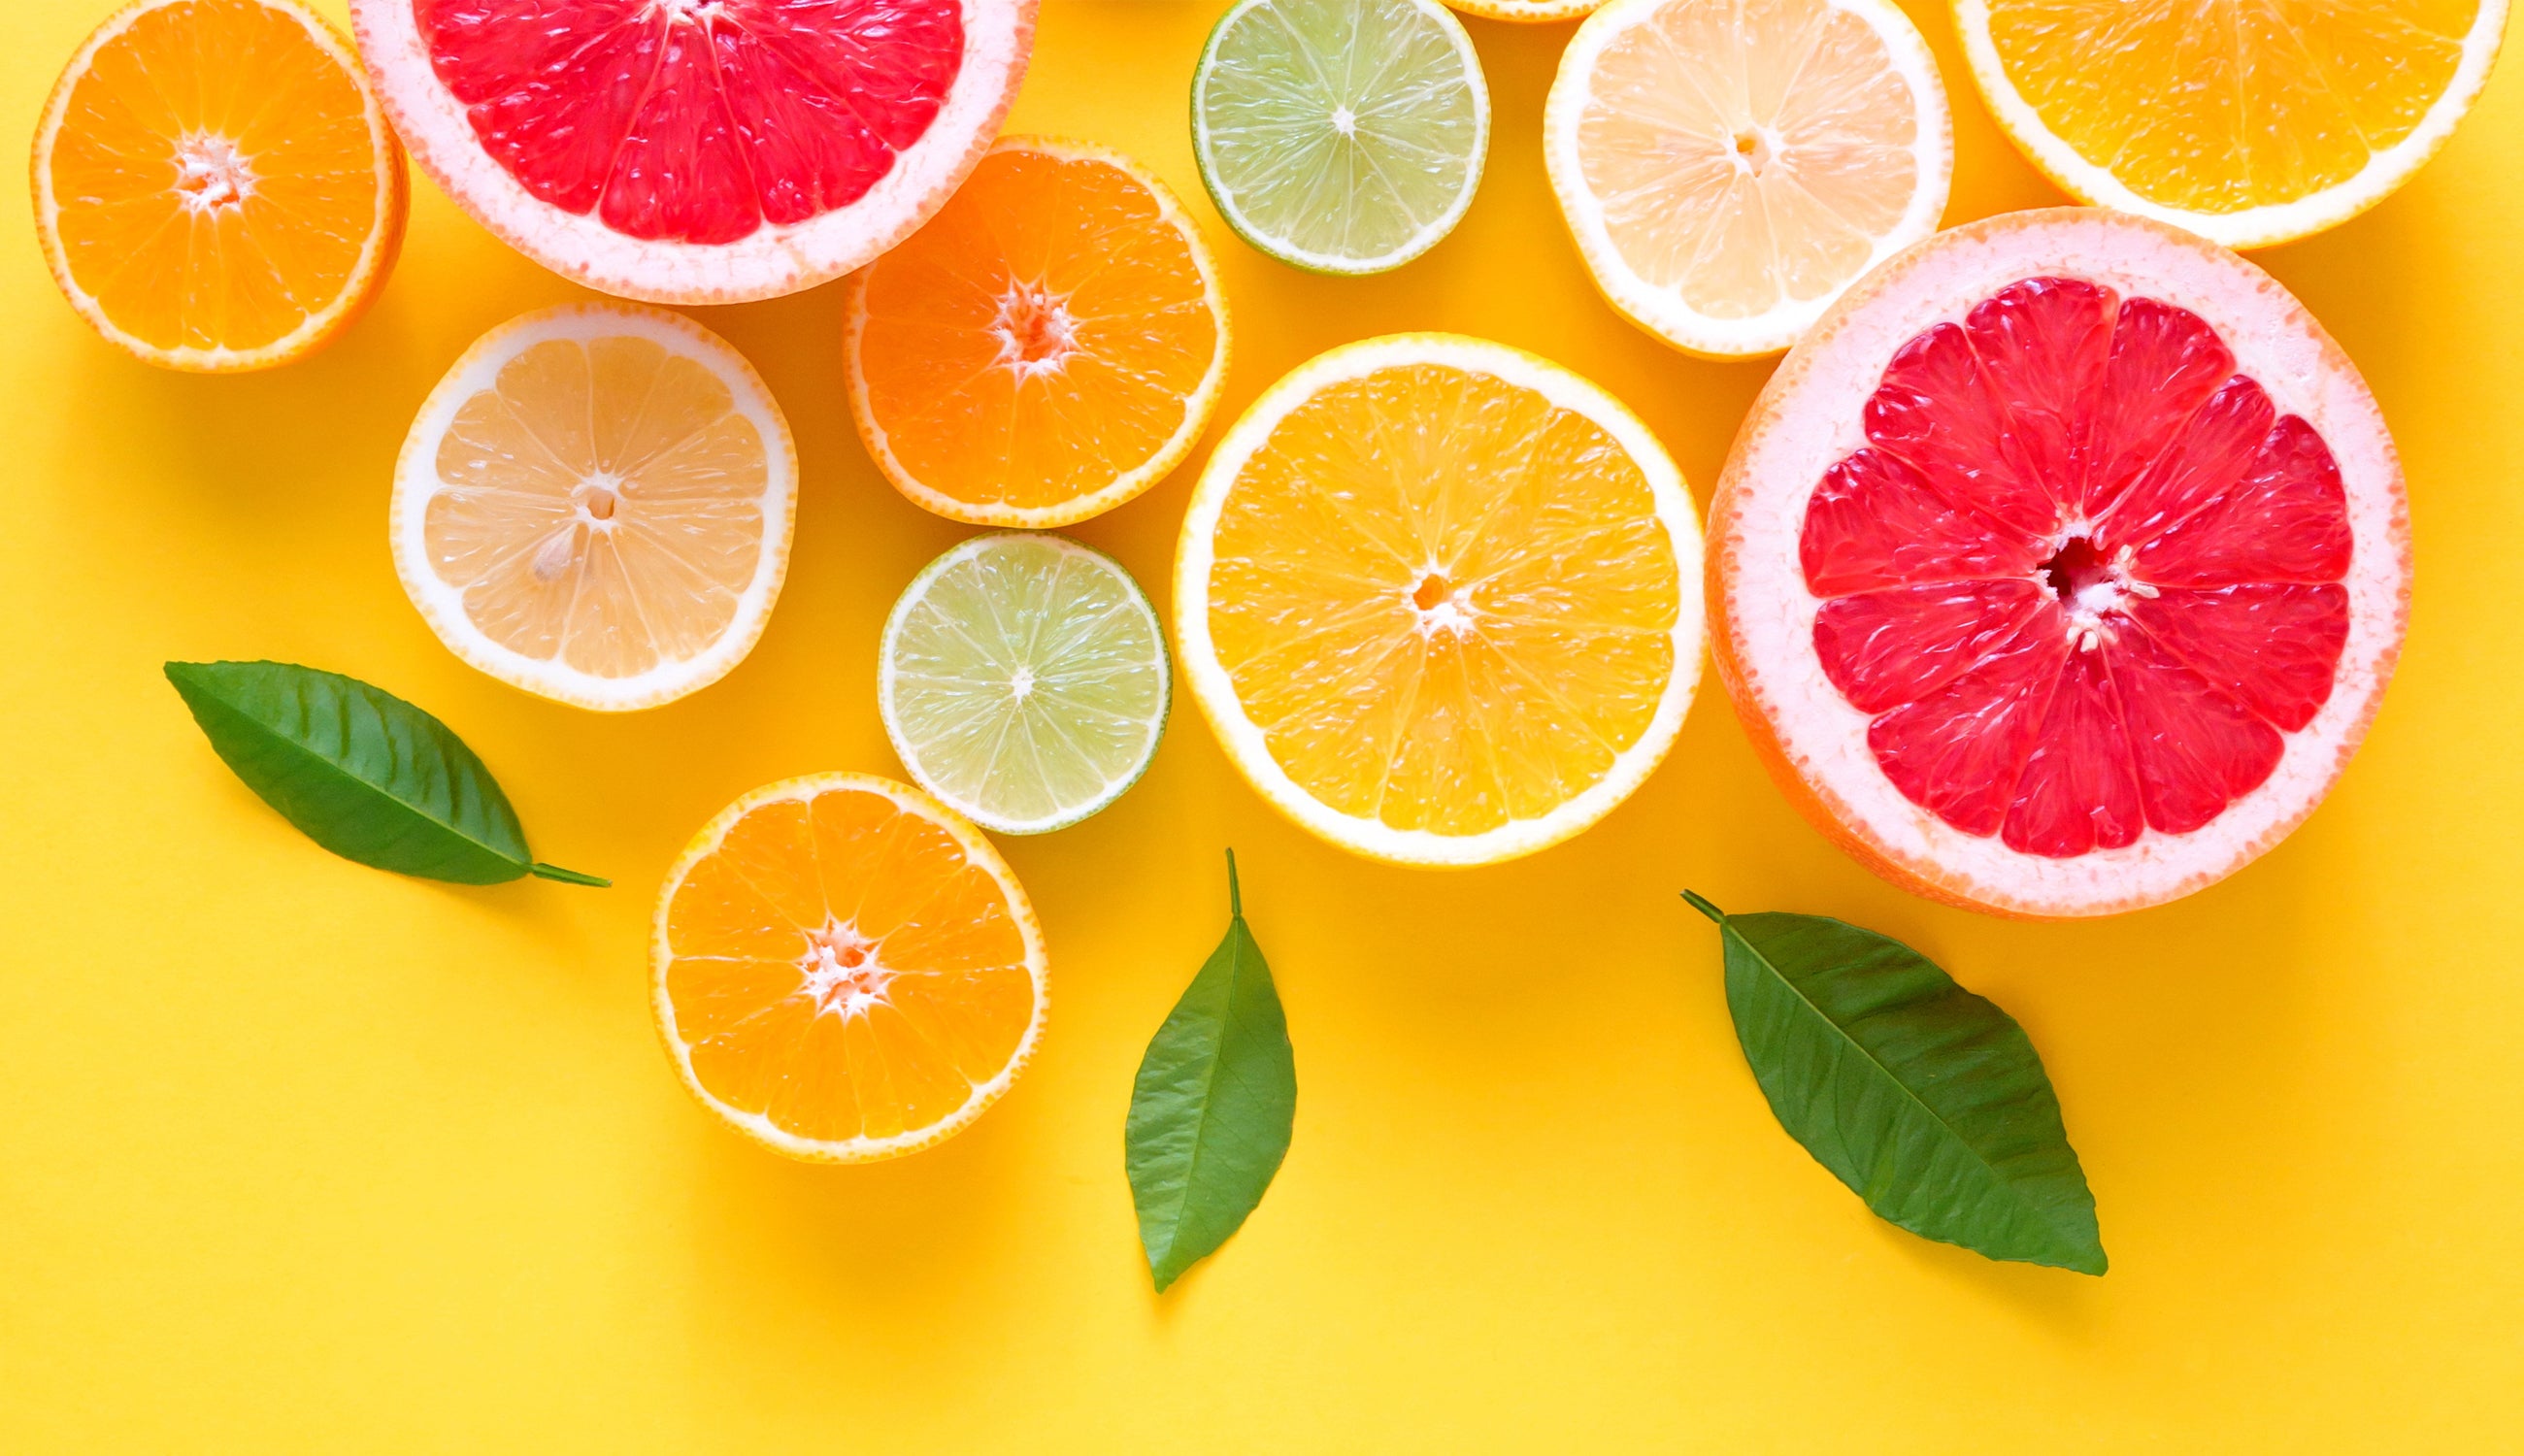 6 Rules for Using Citrus on Skin